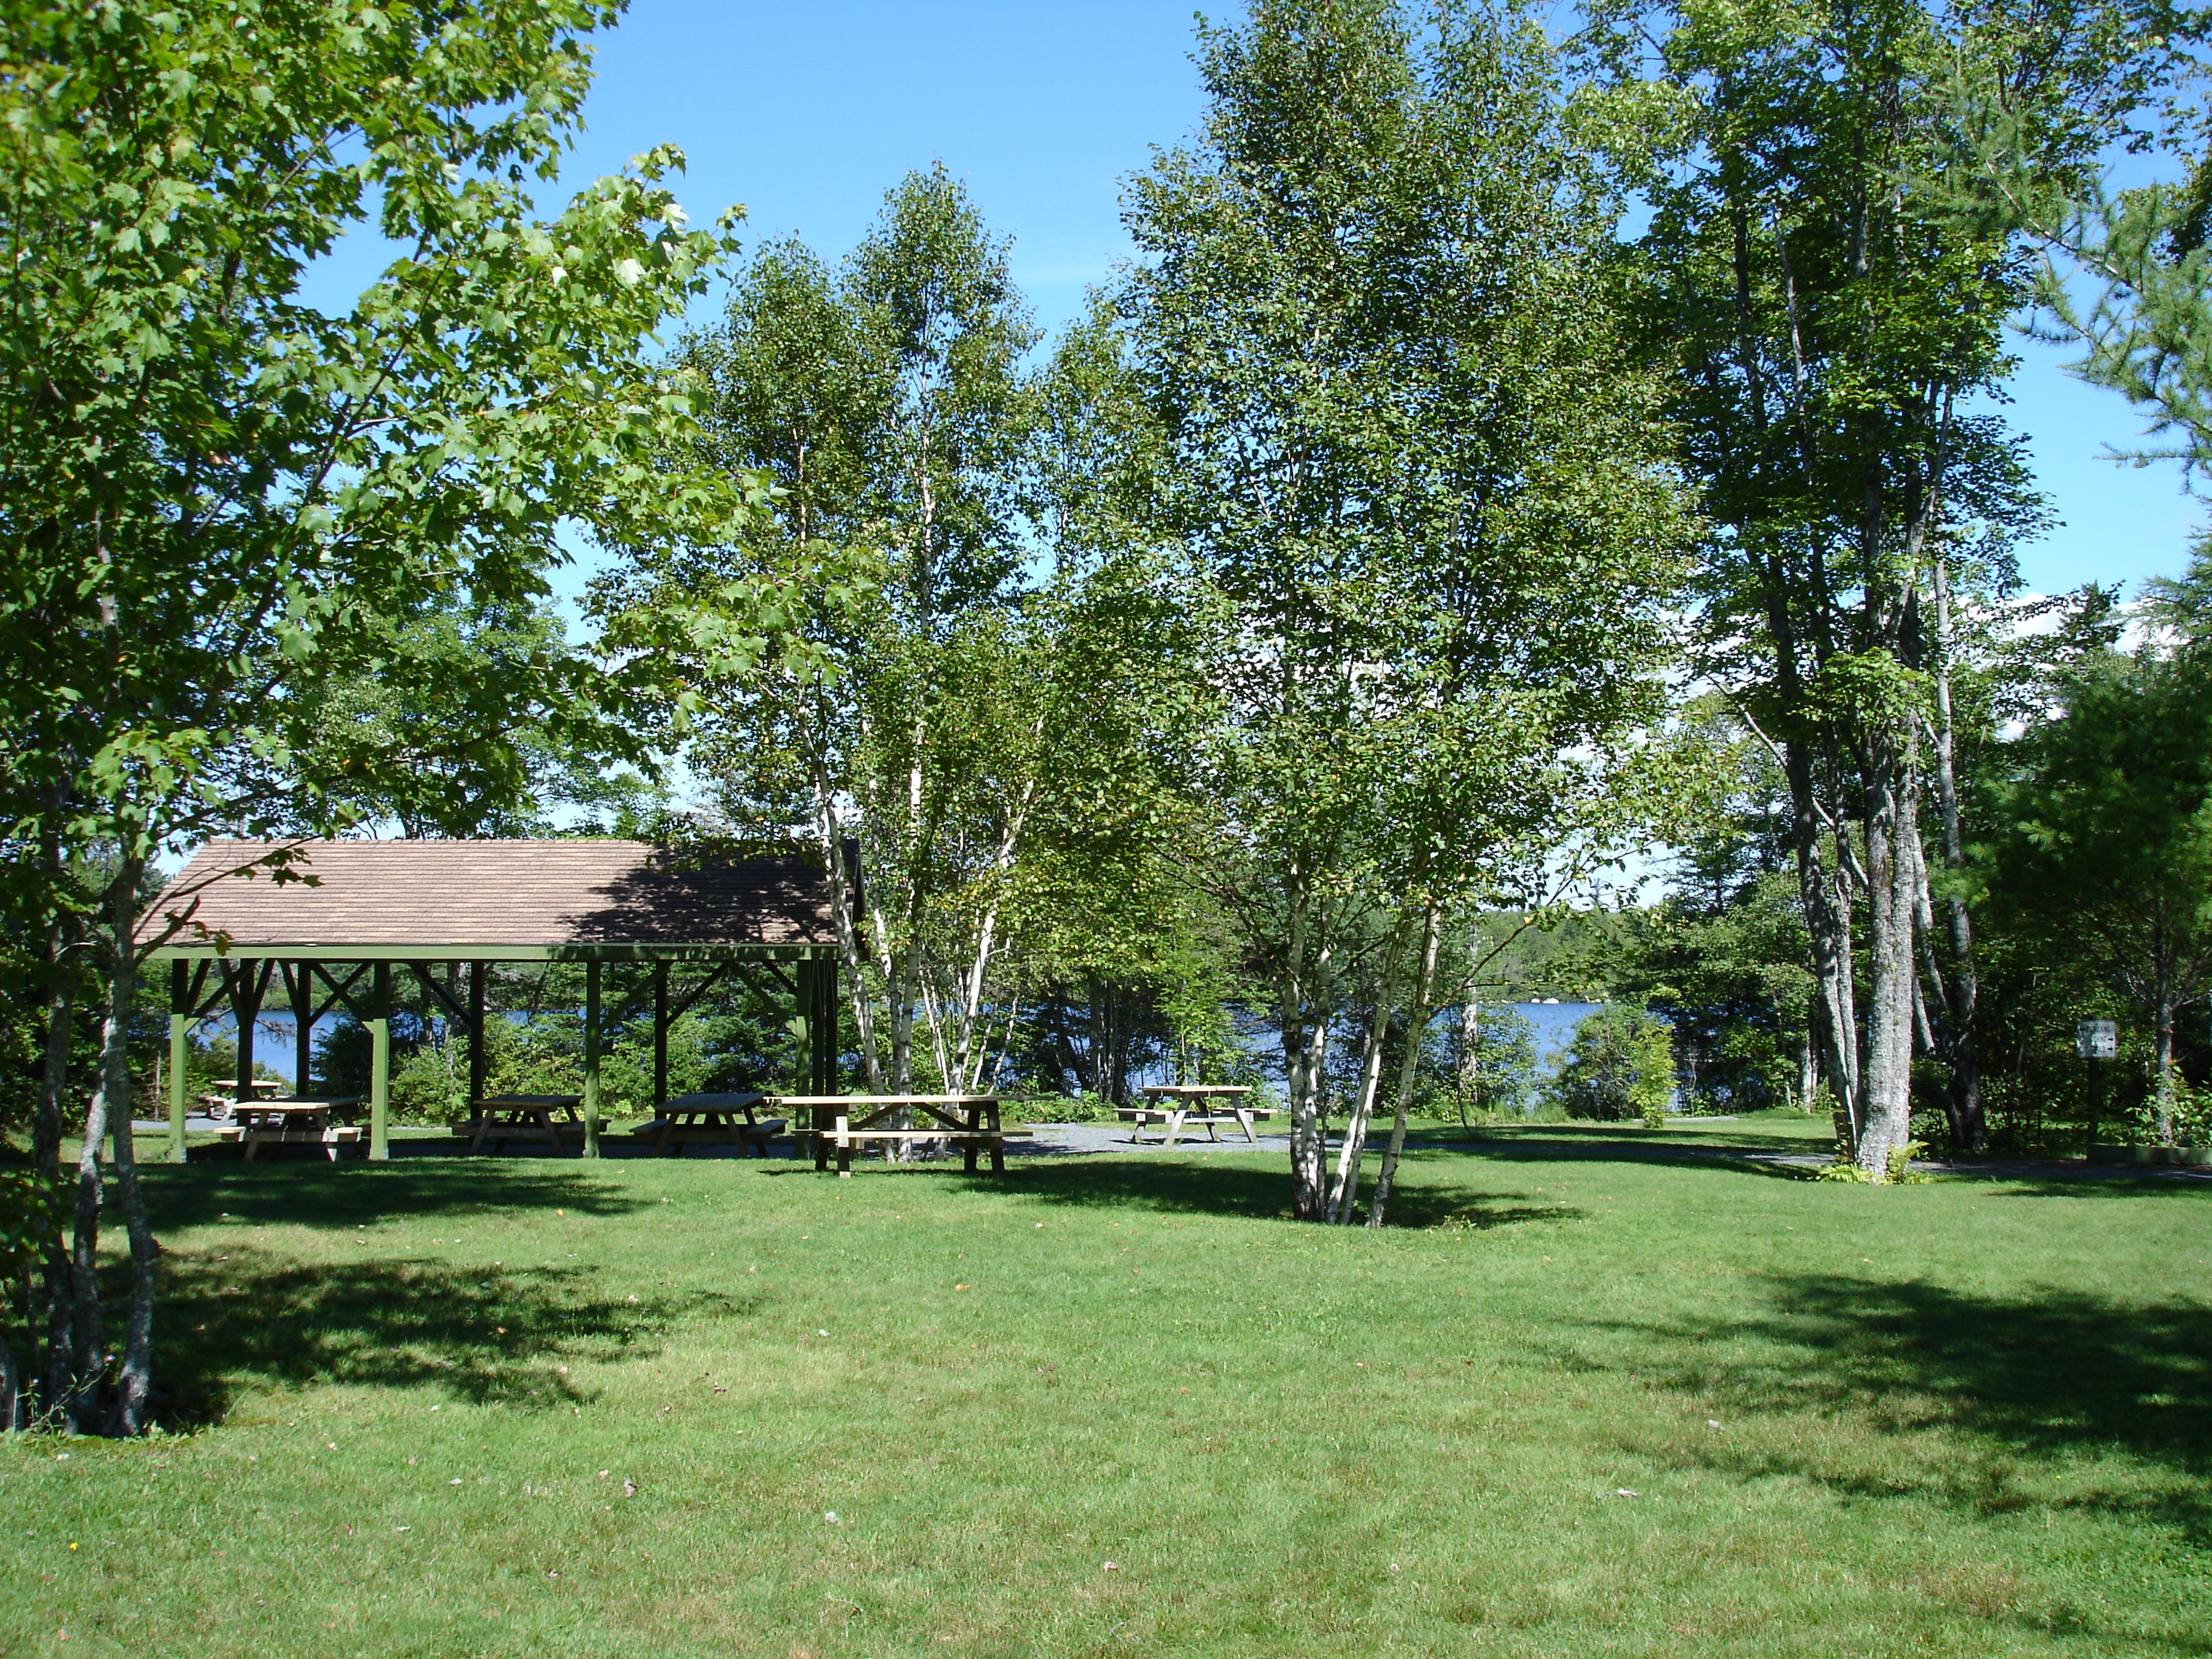 large picnic shelter with tables